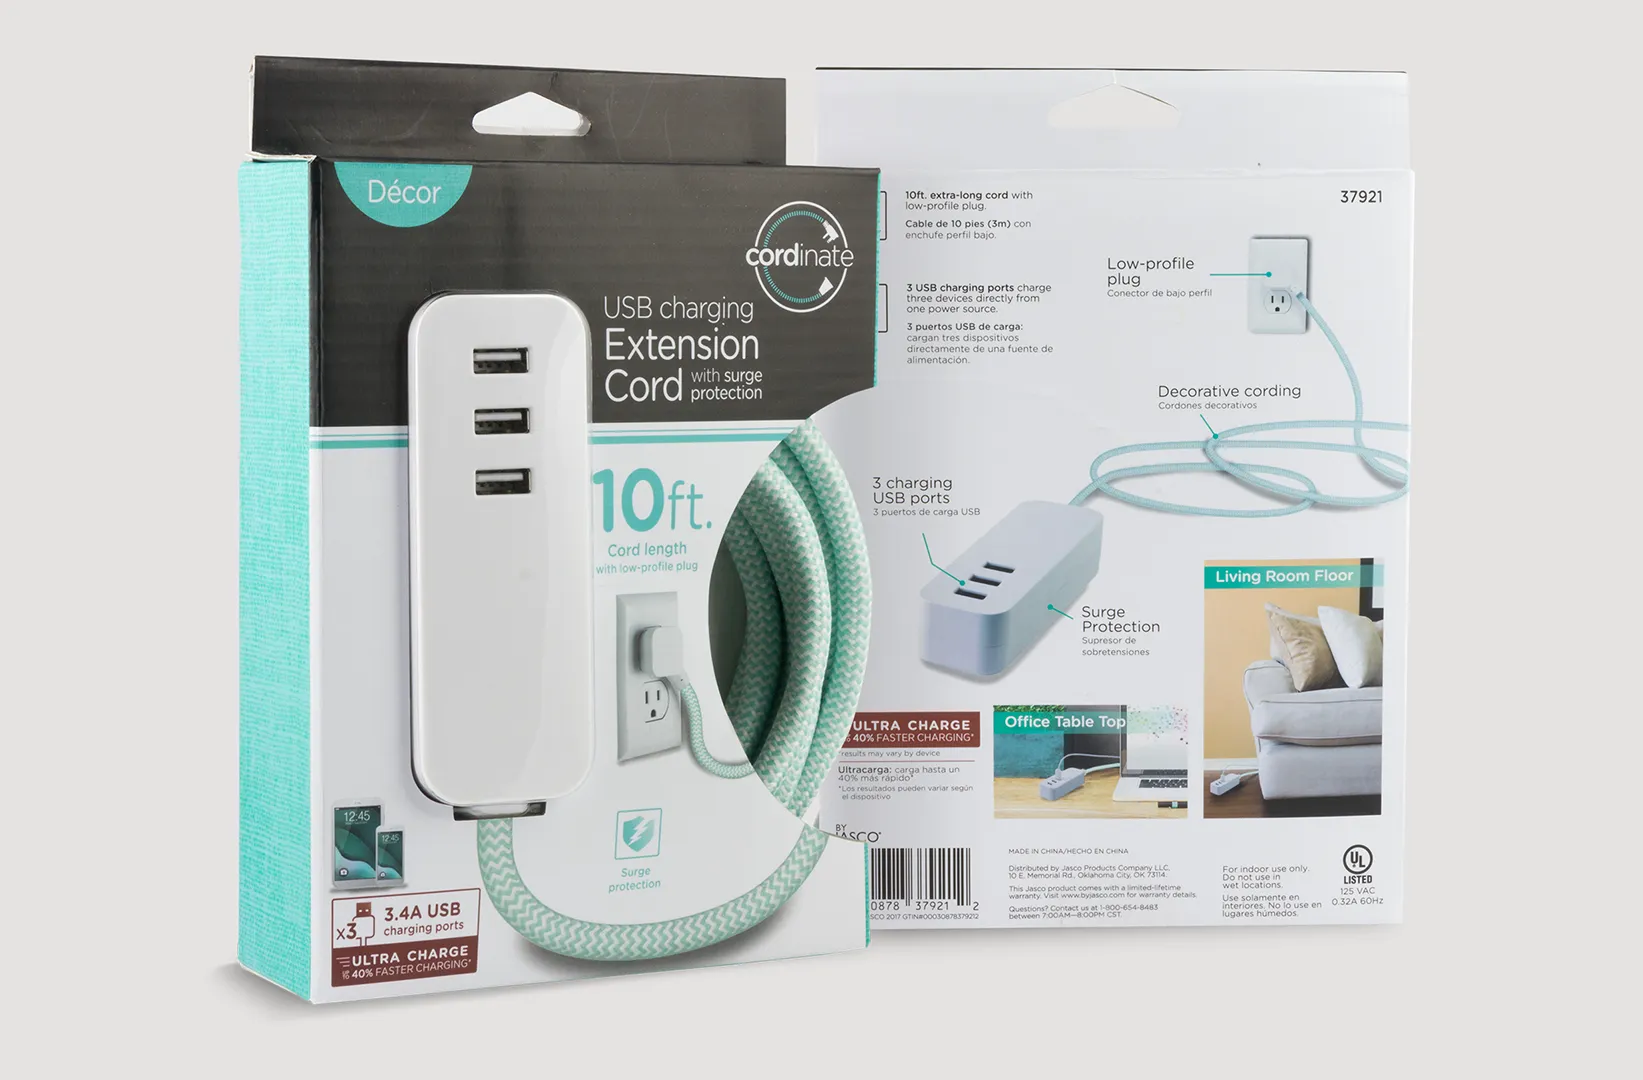 Packaging for a blue 10ft. USB extension cord with a braided fabric cable is displayed against a neutral background.